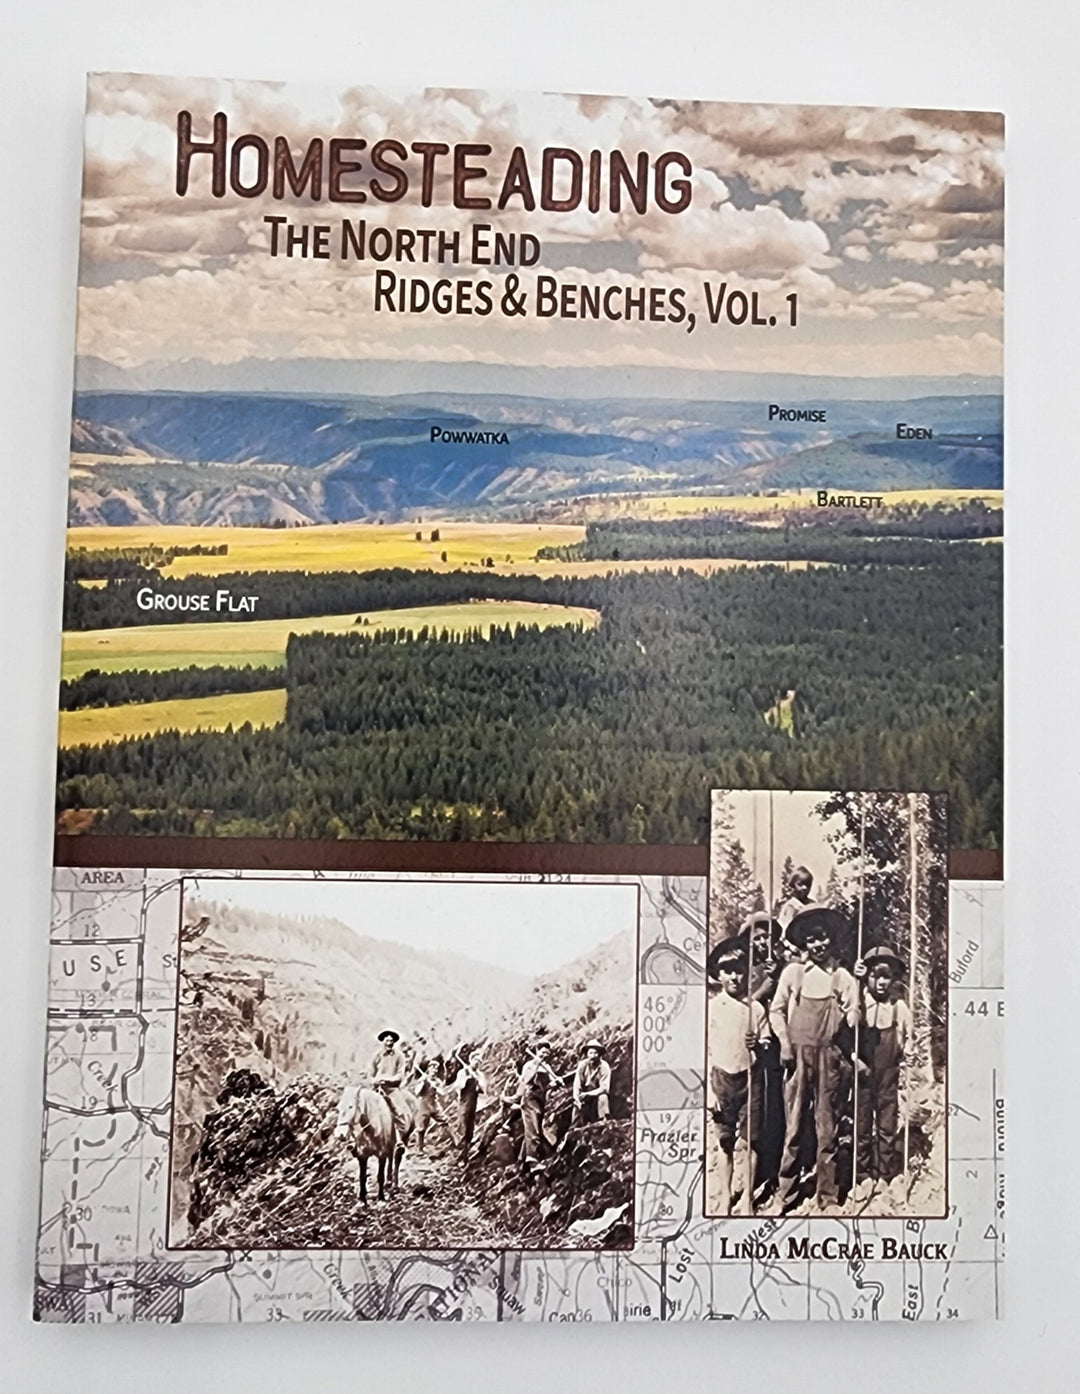 Homesteading-The North End Ridges & Benches, Vol. 1